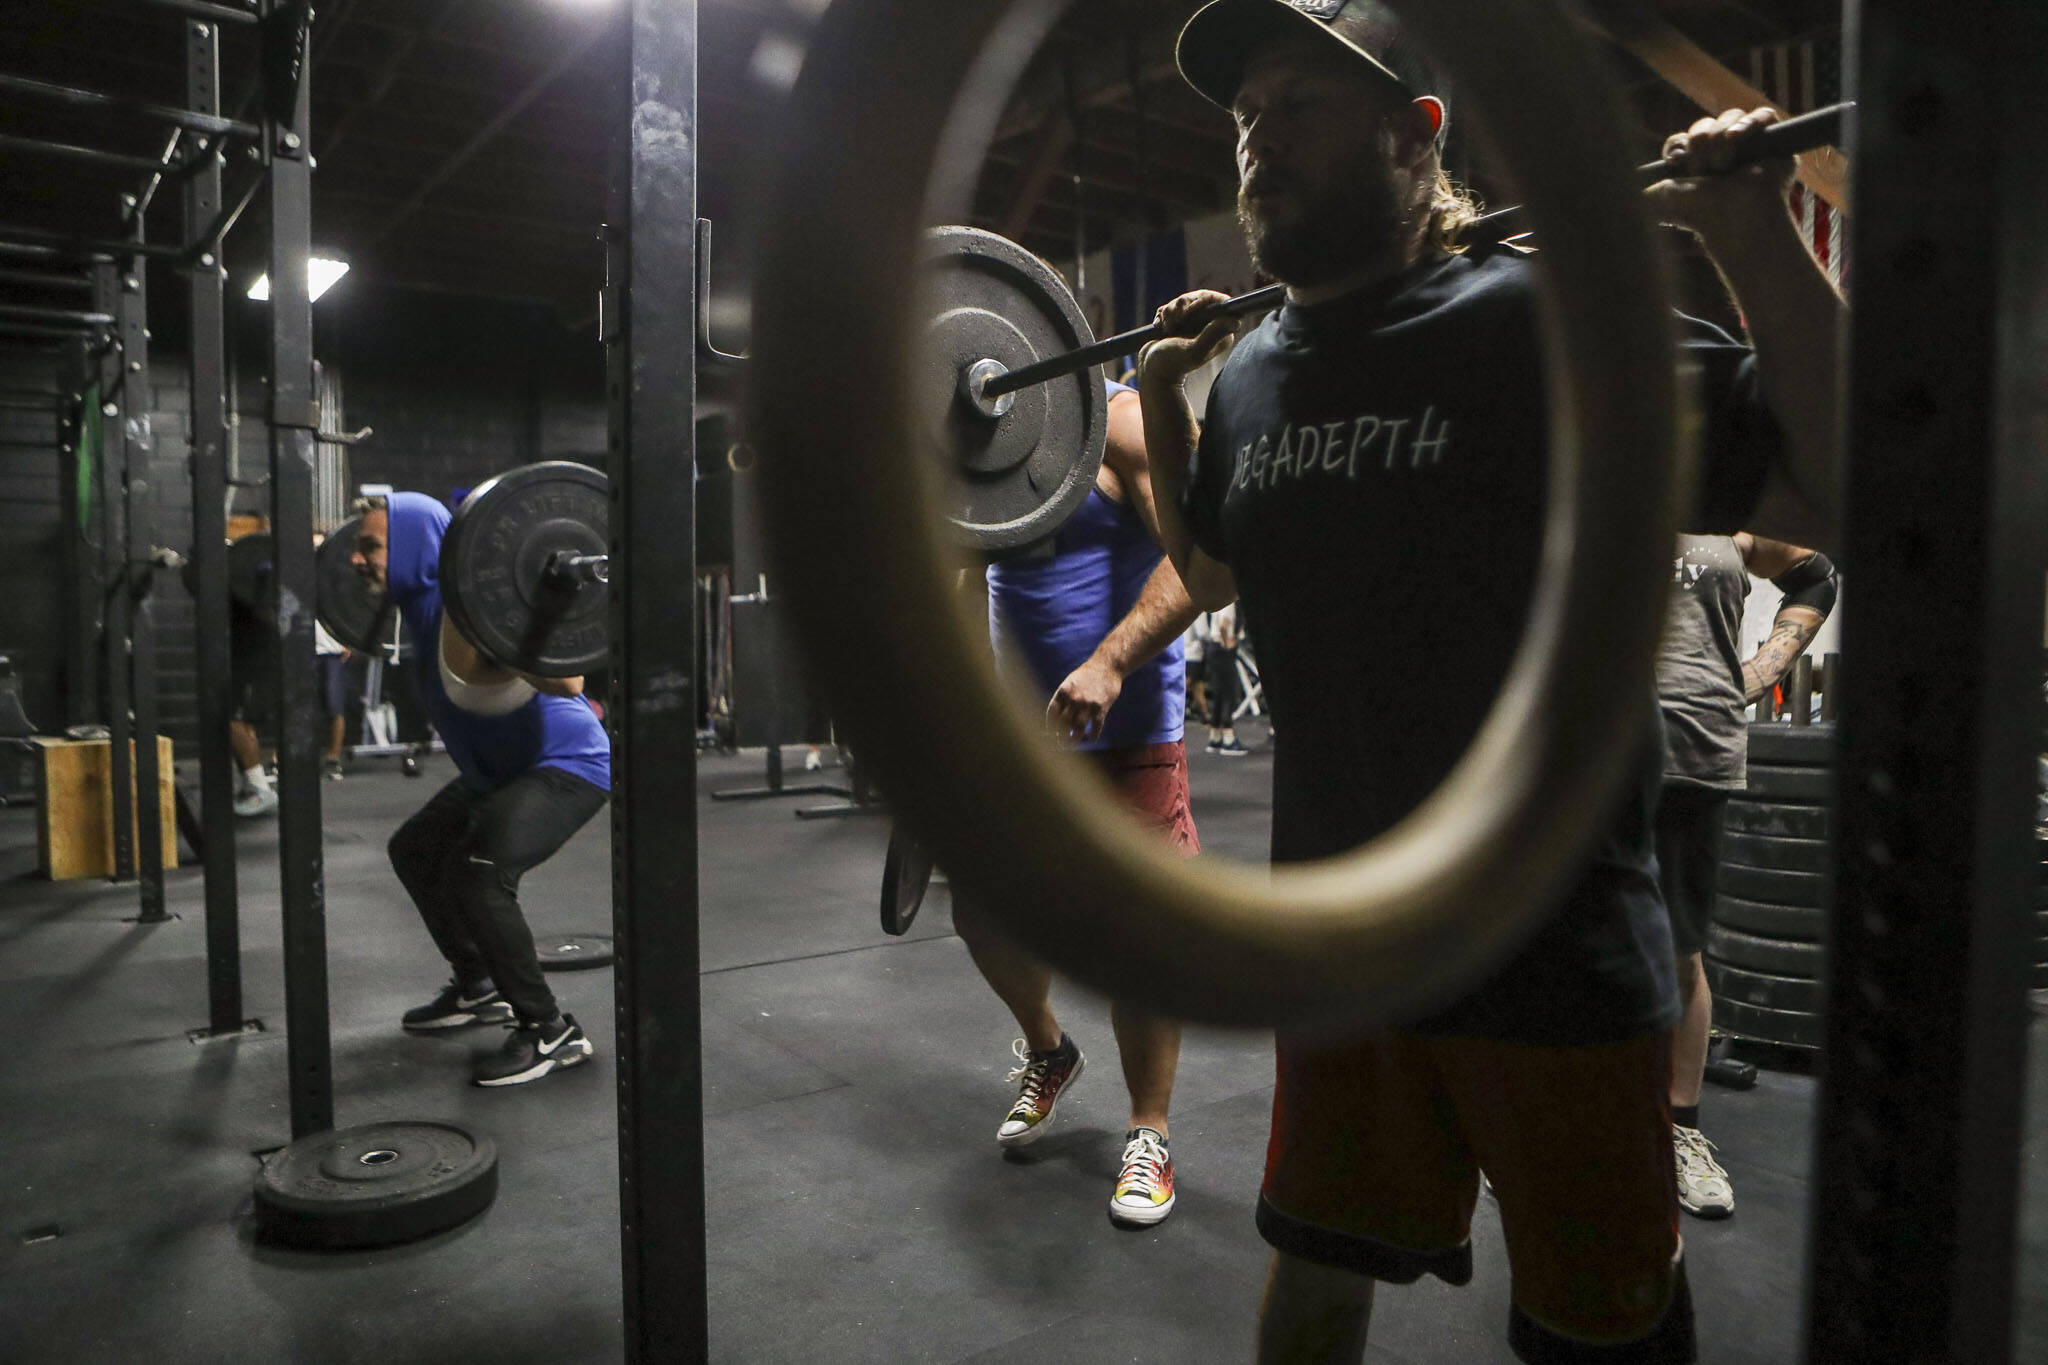 Participants complete training exercises during a class lead by Harrison Wolff at Remedy Athletics in Marysville, Washington on Wednesday, Oct. 11, 2023. (Annie Barker / The Herald)